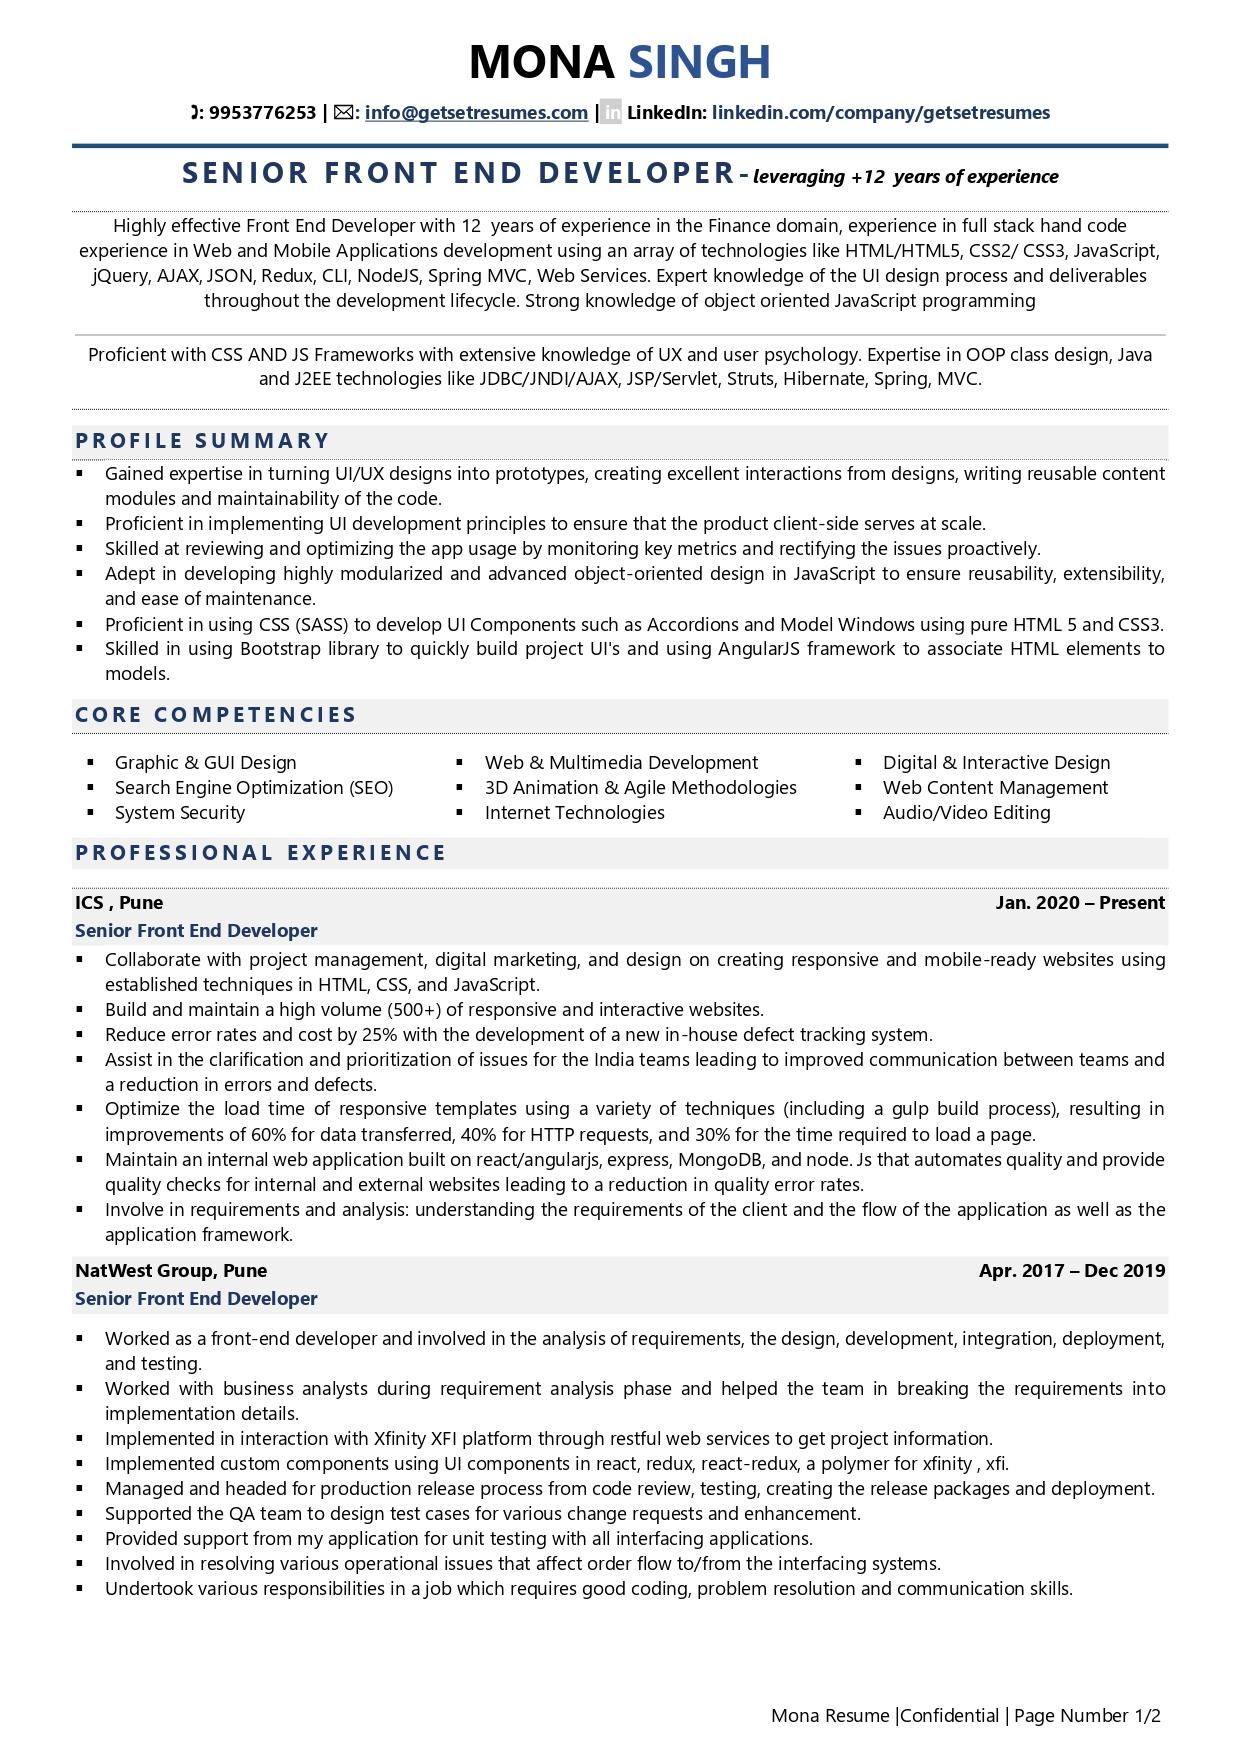 Front End Developer - Resume Example & Template